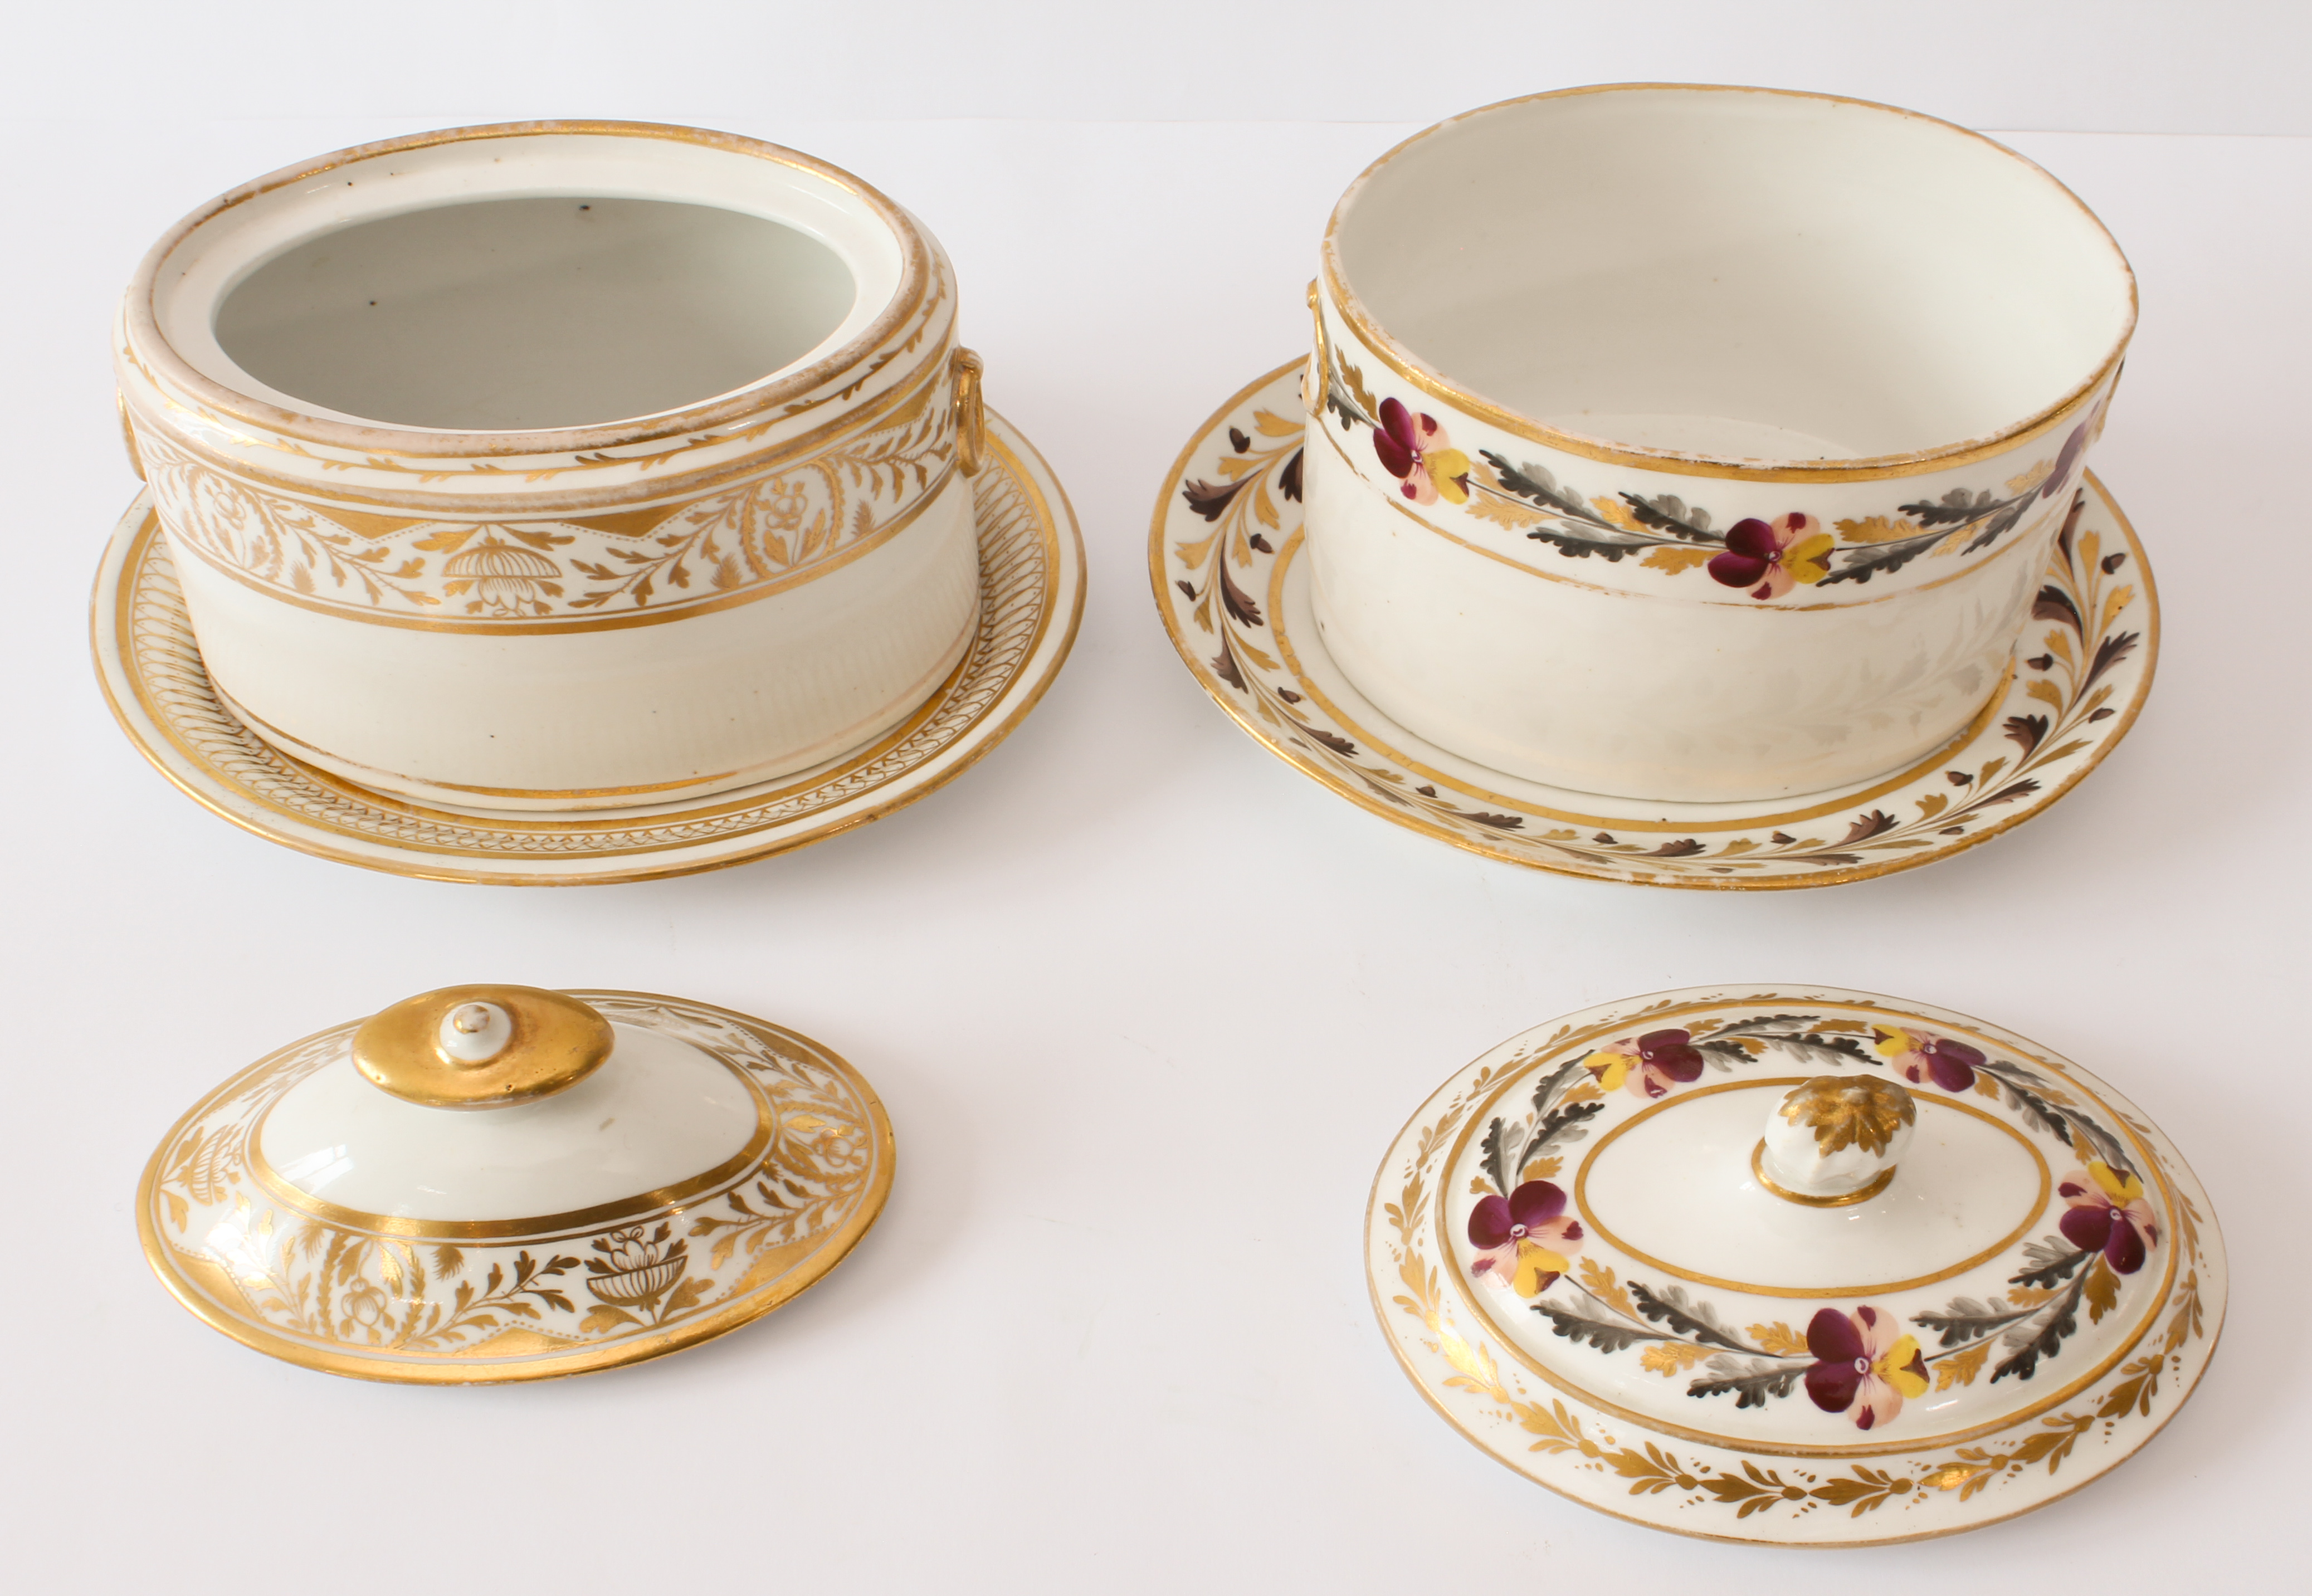 Two 19th century English porcelain oval sugar boxes and closely matched stands - one decorated - Image 3 of 6